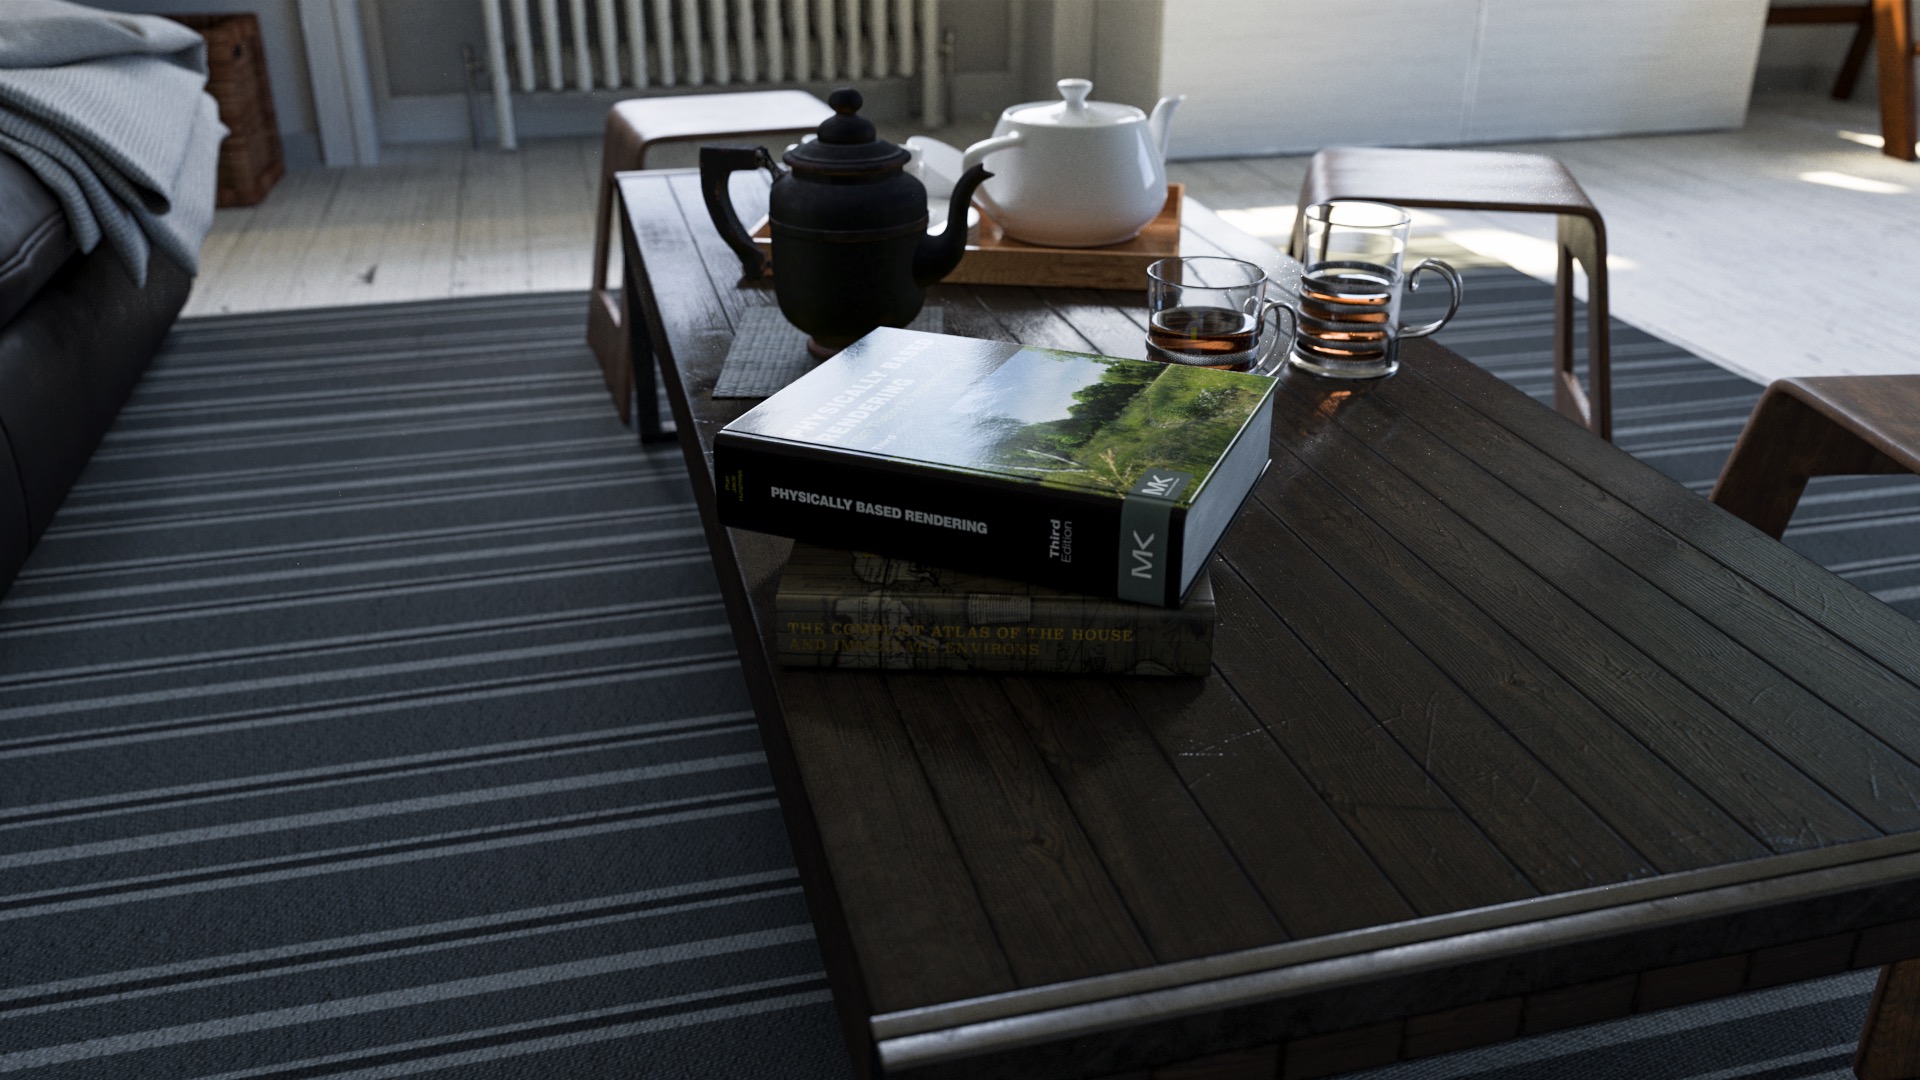 Figure 7: Physically Based Rendering Third Edition sitting on the coffee table.